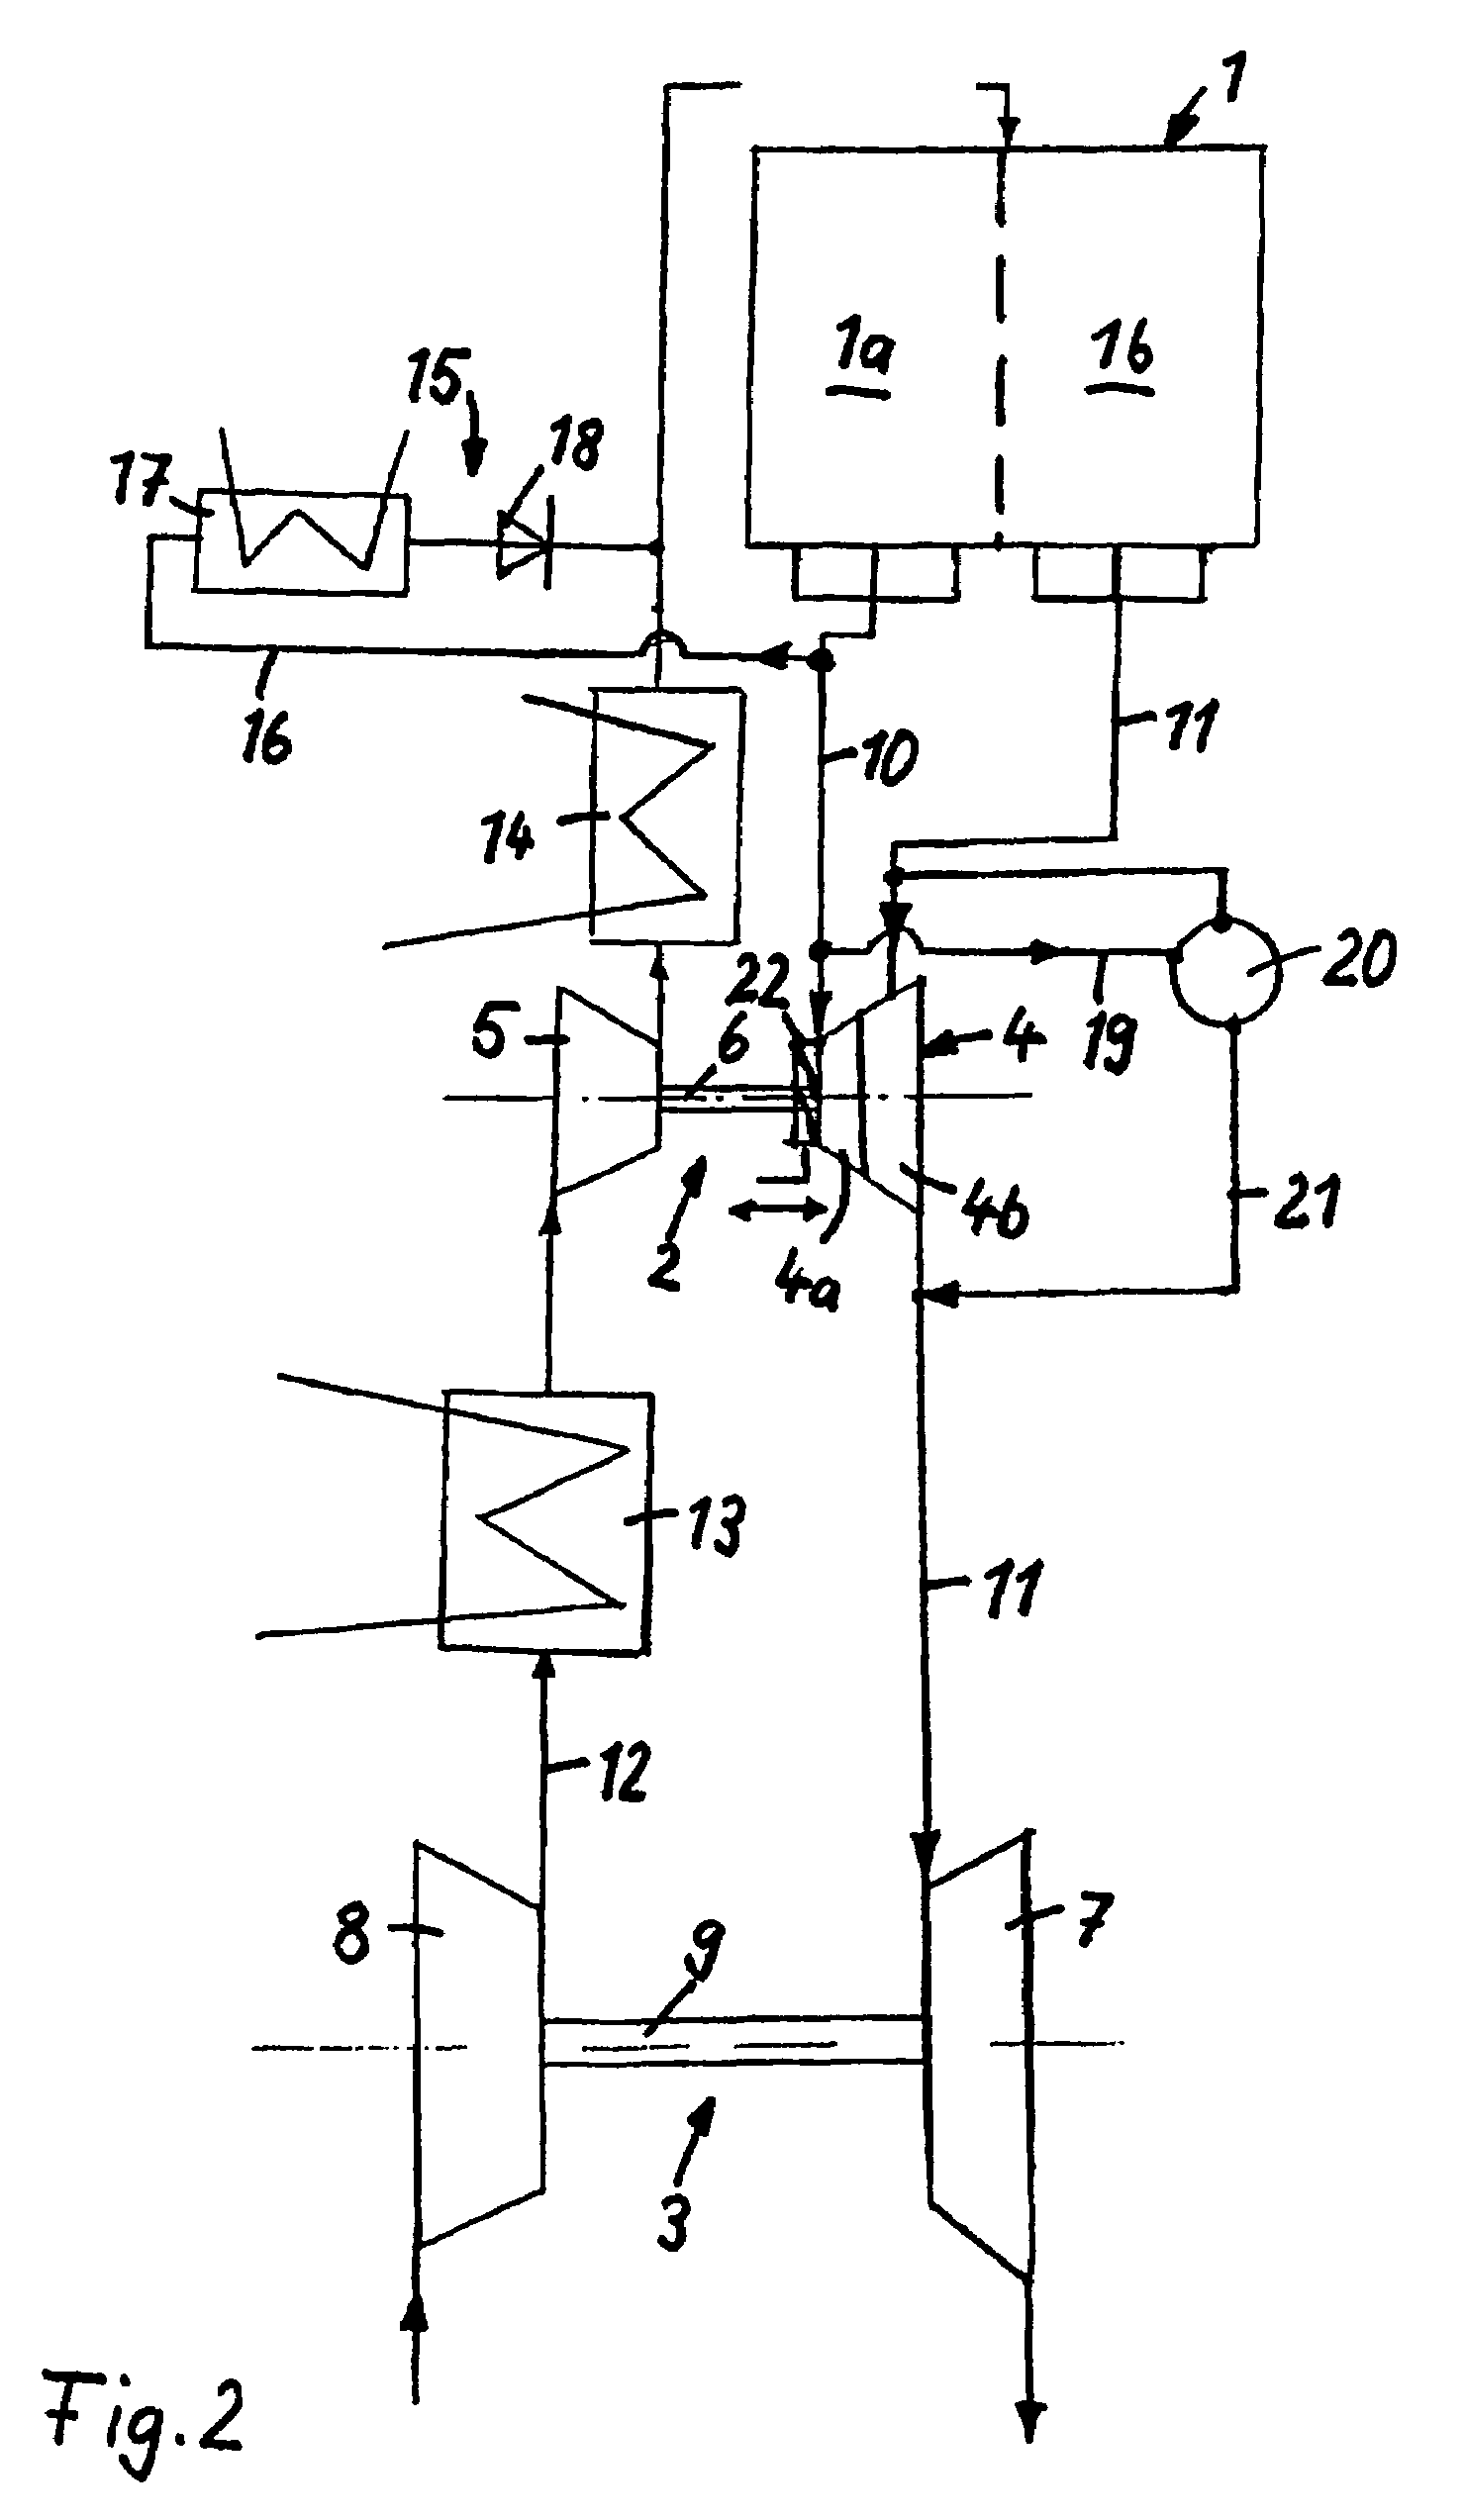 Internal combustion engine having two exhaust gas turbocharger